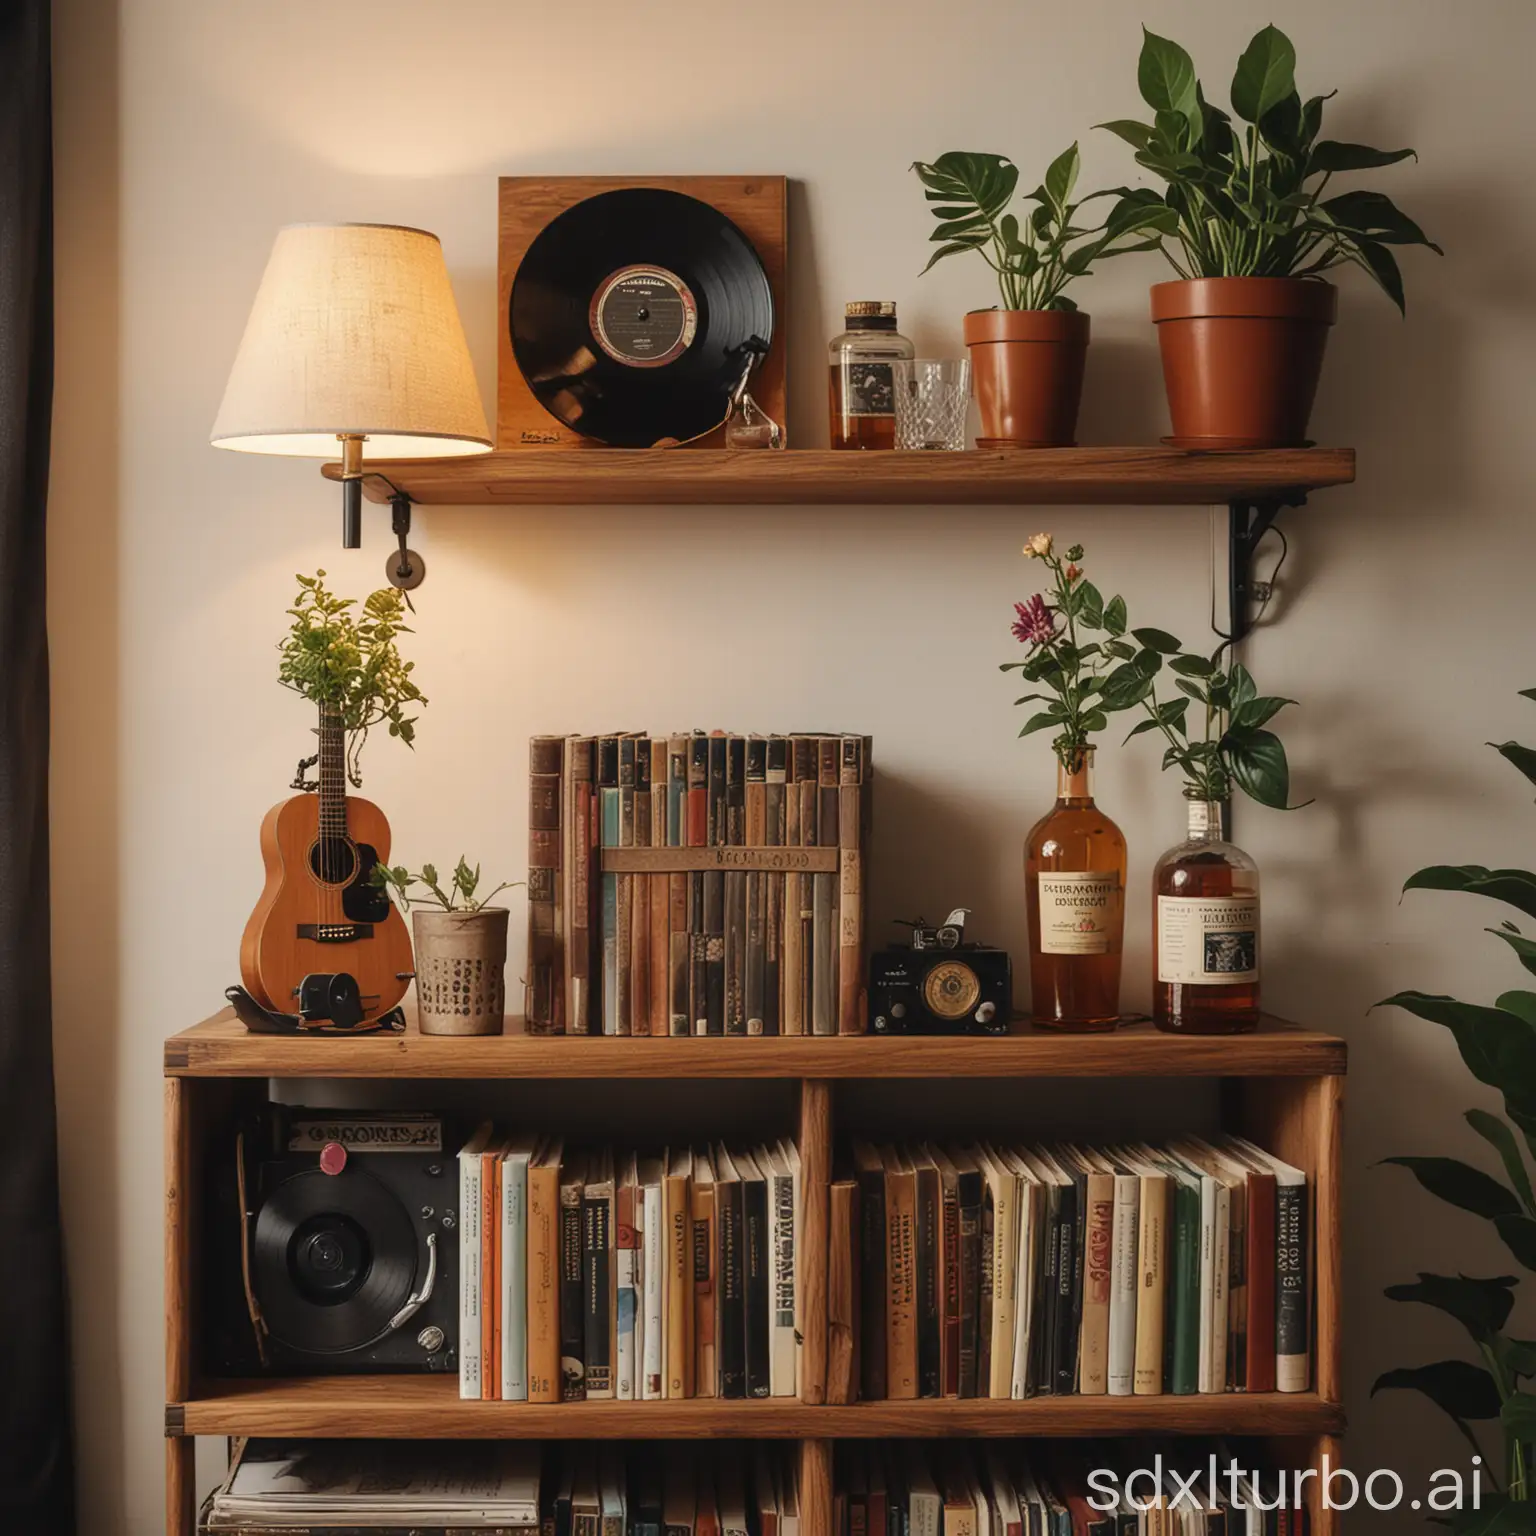 Vintage-Home-Decor-with-Acoustic-Guitar-Whiskey-Bottles-and-Records